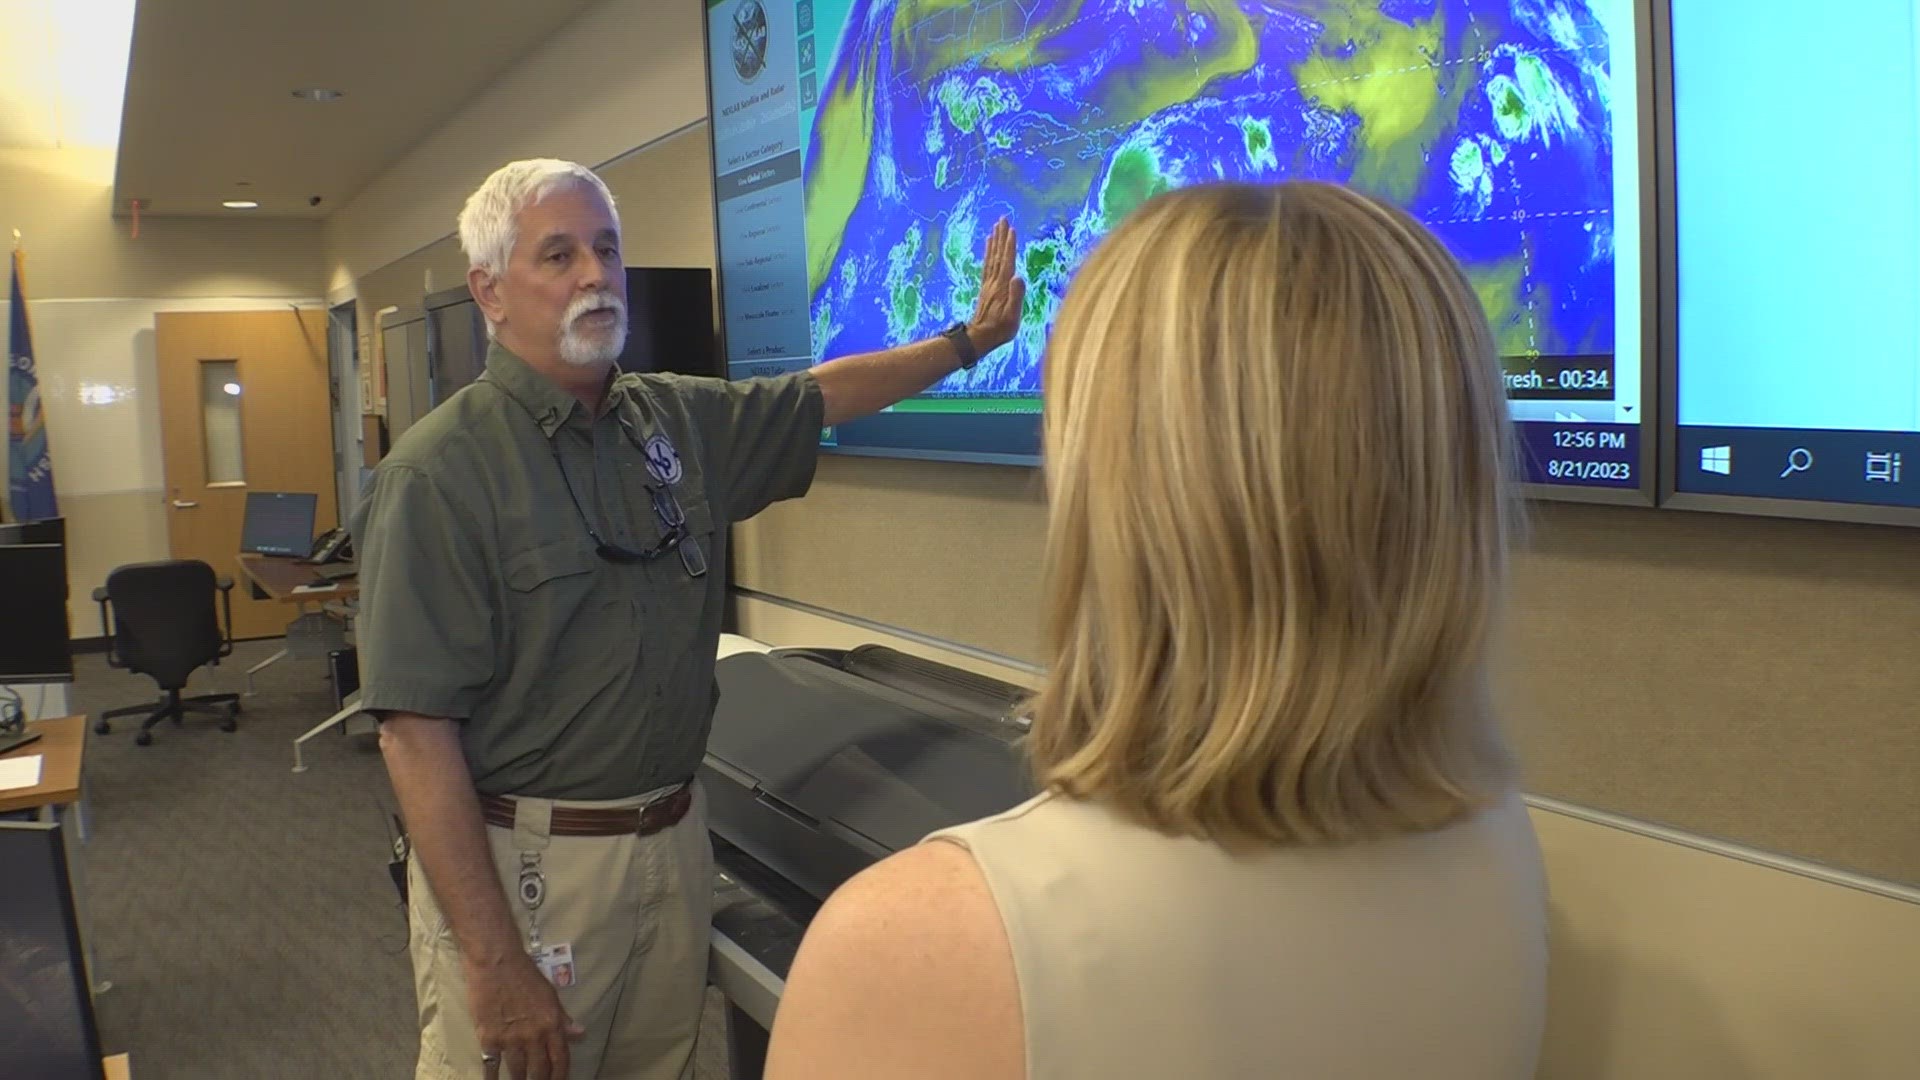 The parish has new plans for how to respond to a hurricane threat. It's been revamped since Hurricane Ida.